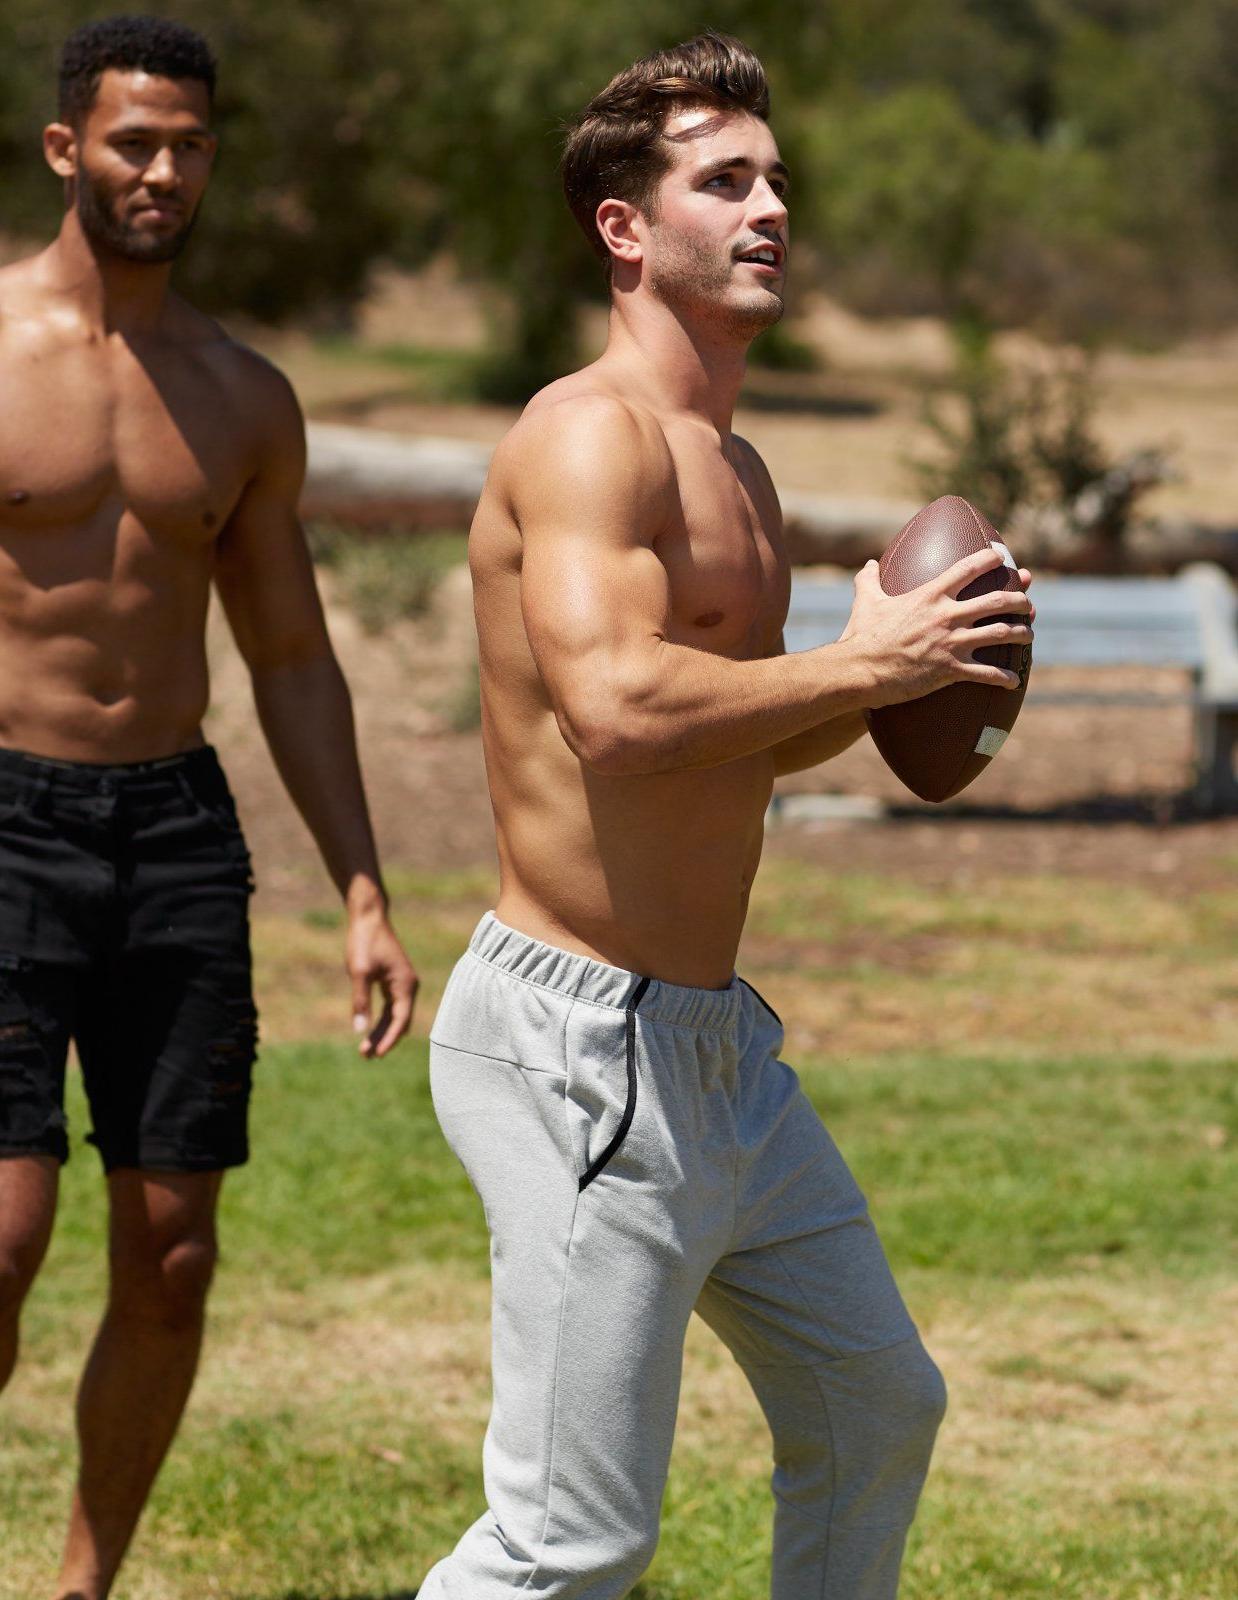 cute-young-sportsmen-pretty-shirtless-fit-jocks-playing-ball-outdoors